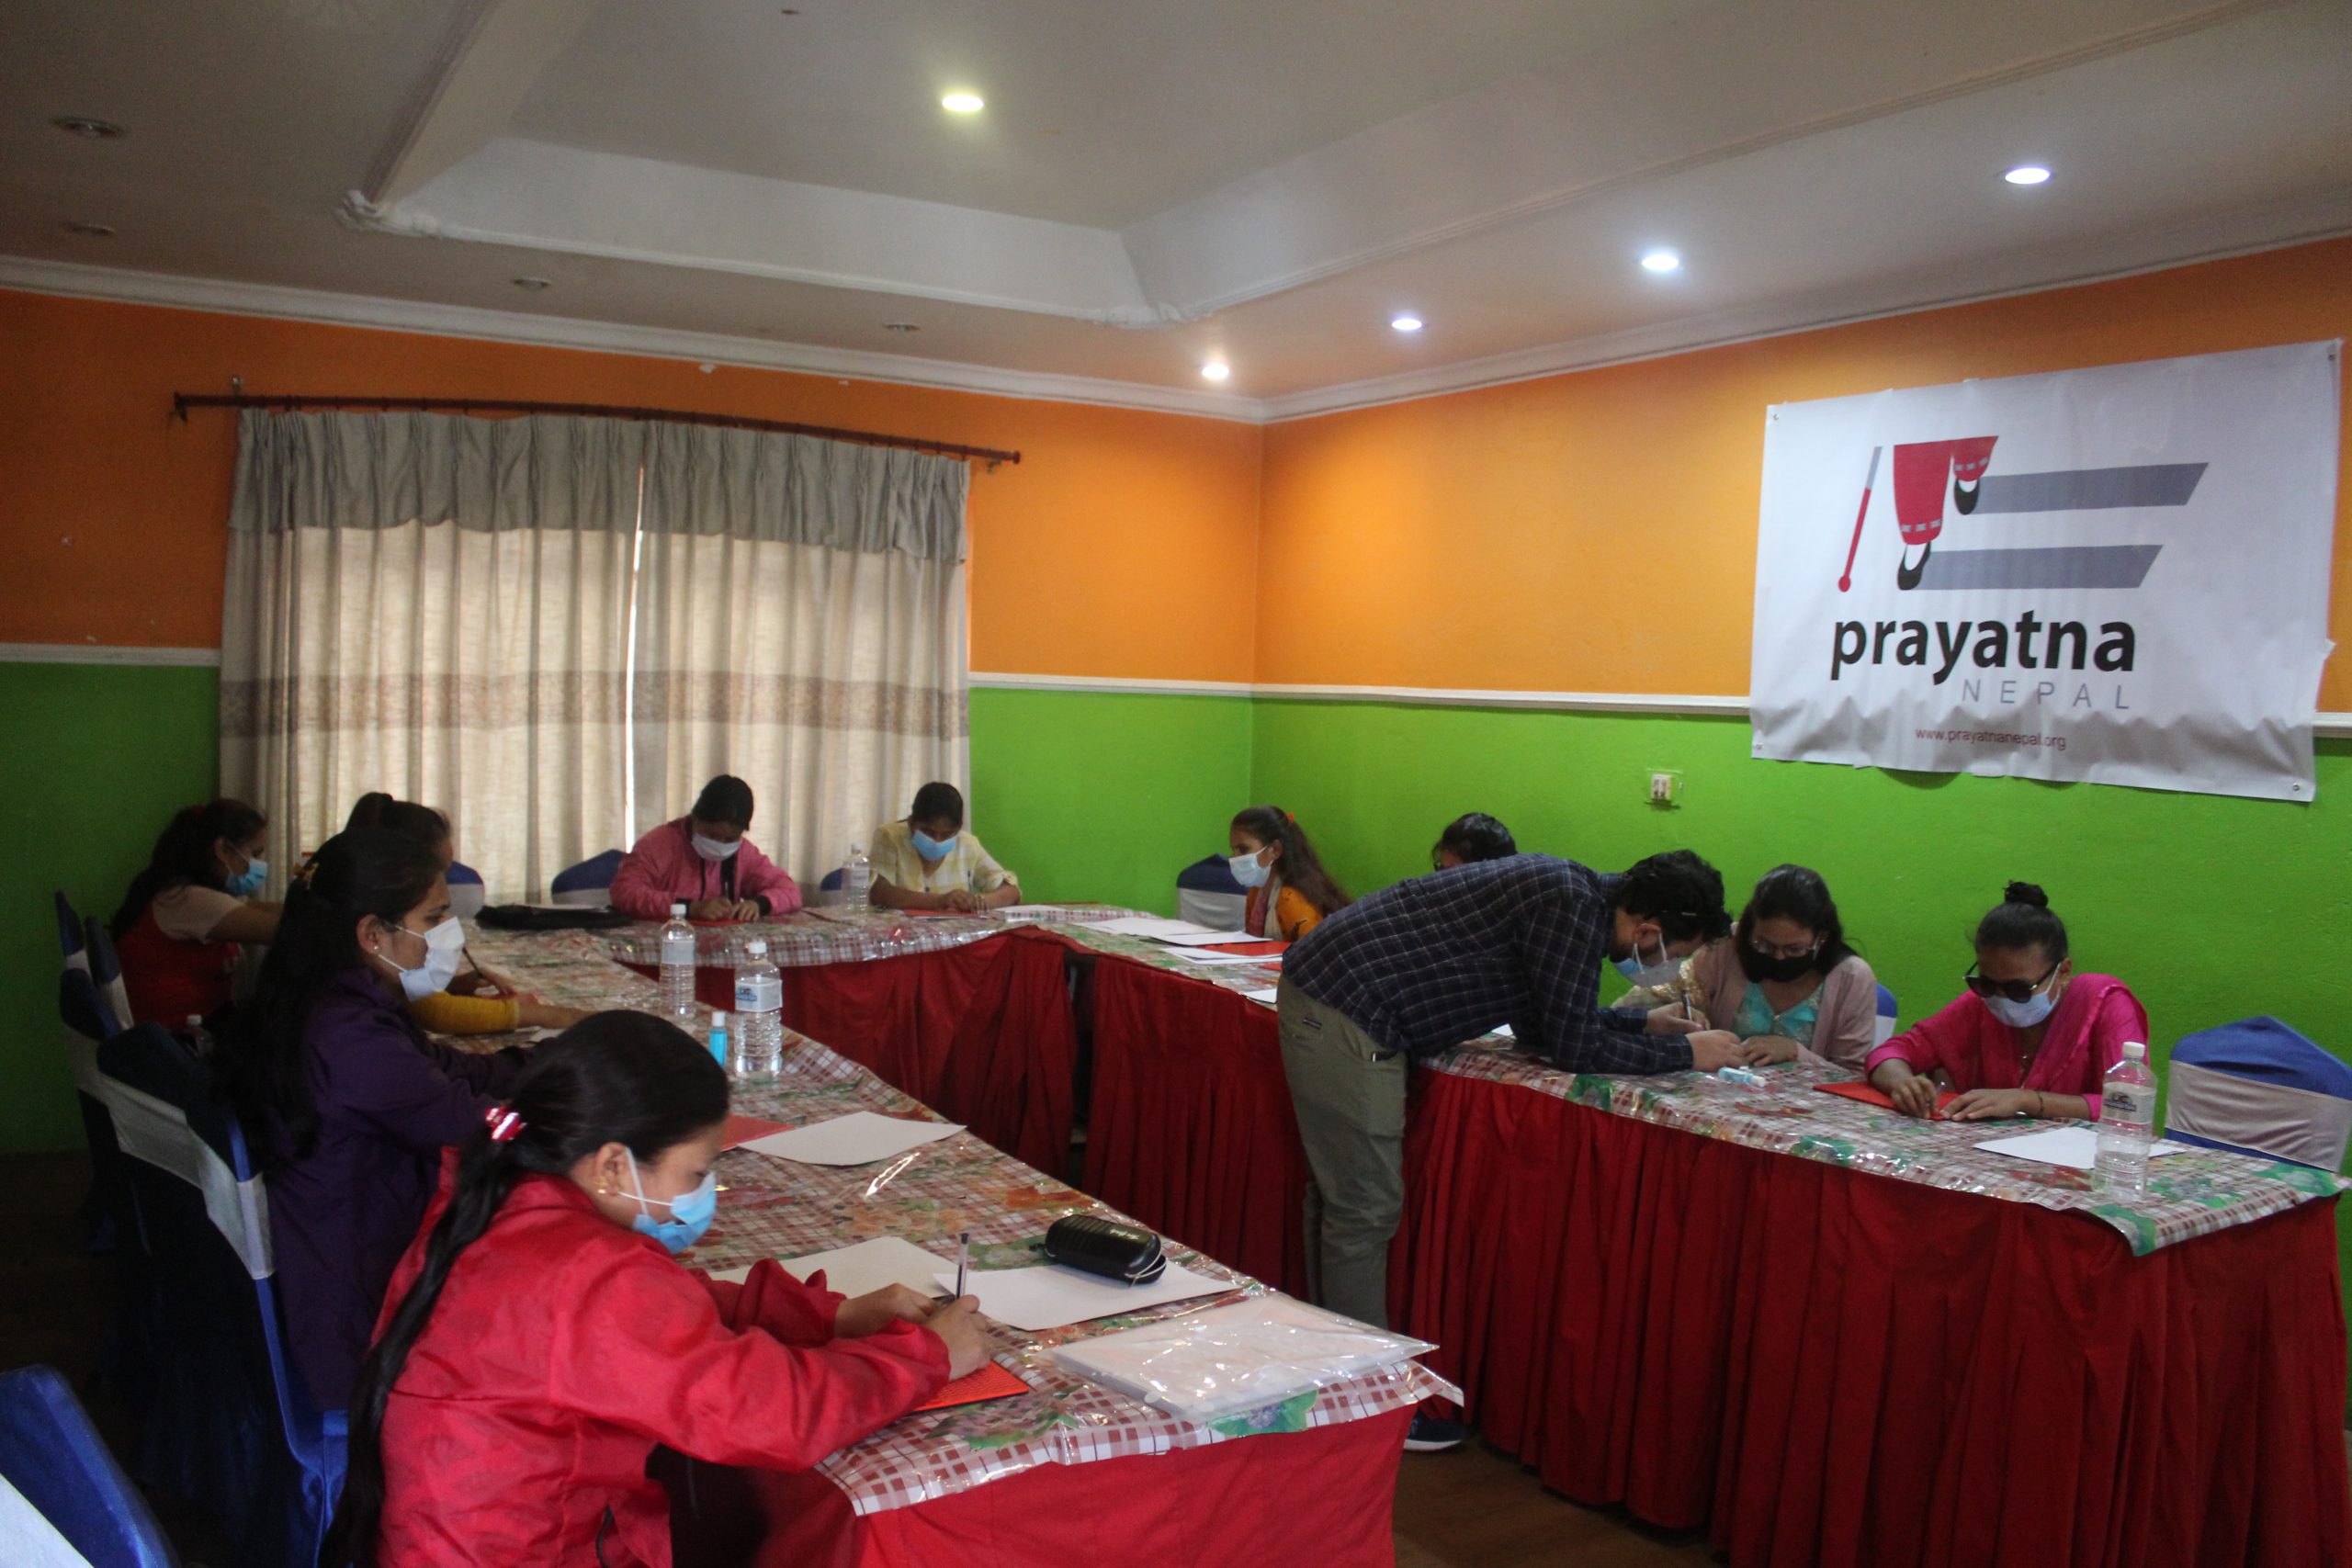 All participant writing their name on paper